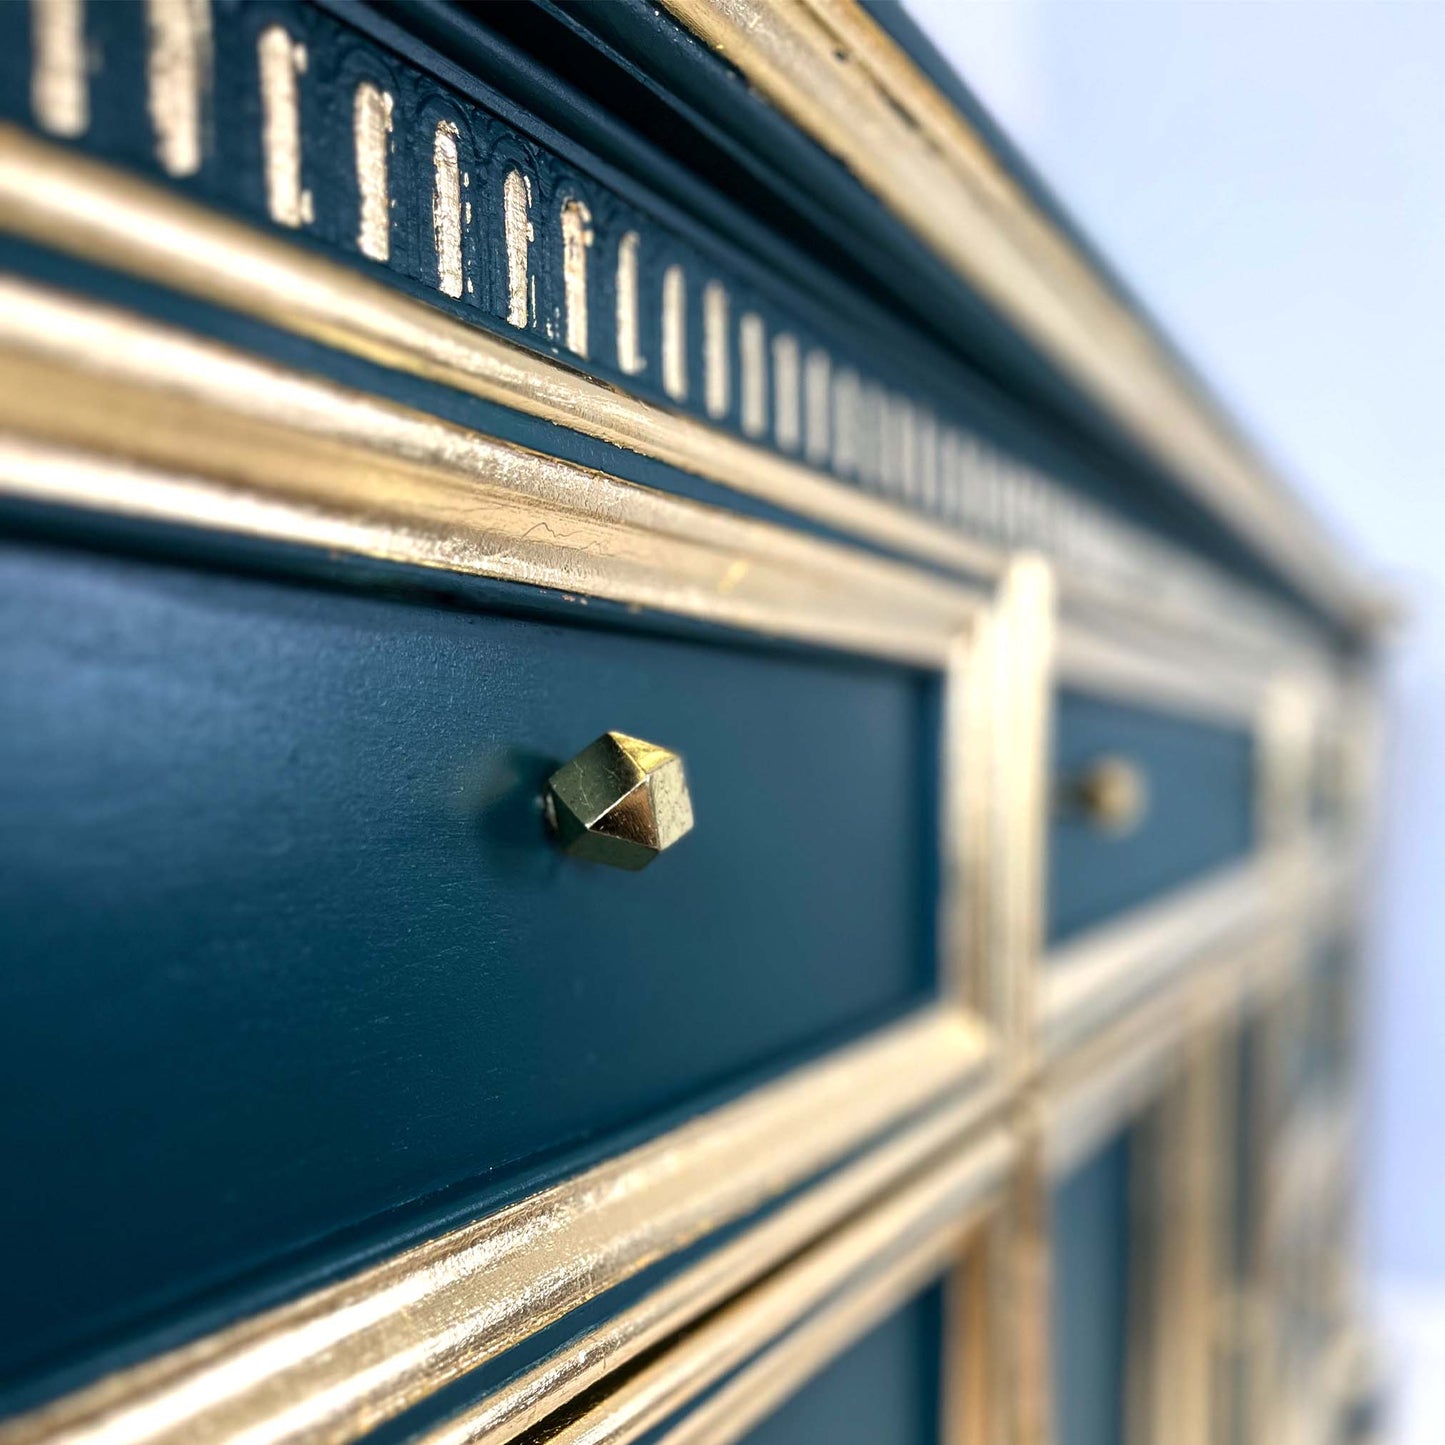 Upcycled Georgian style sideboard with gold